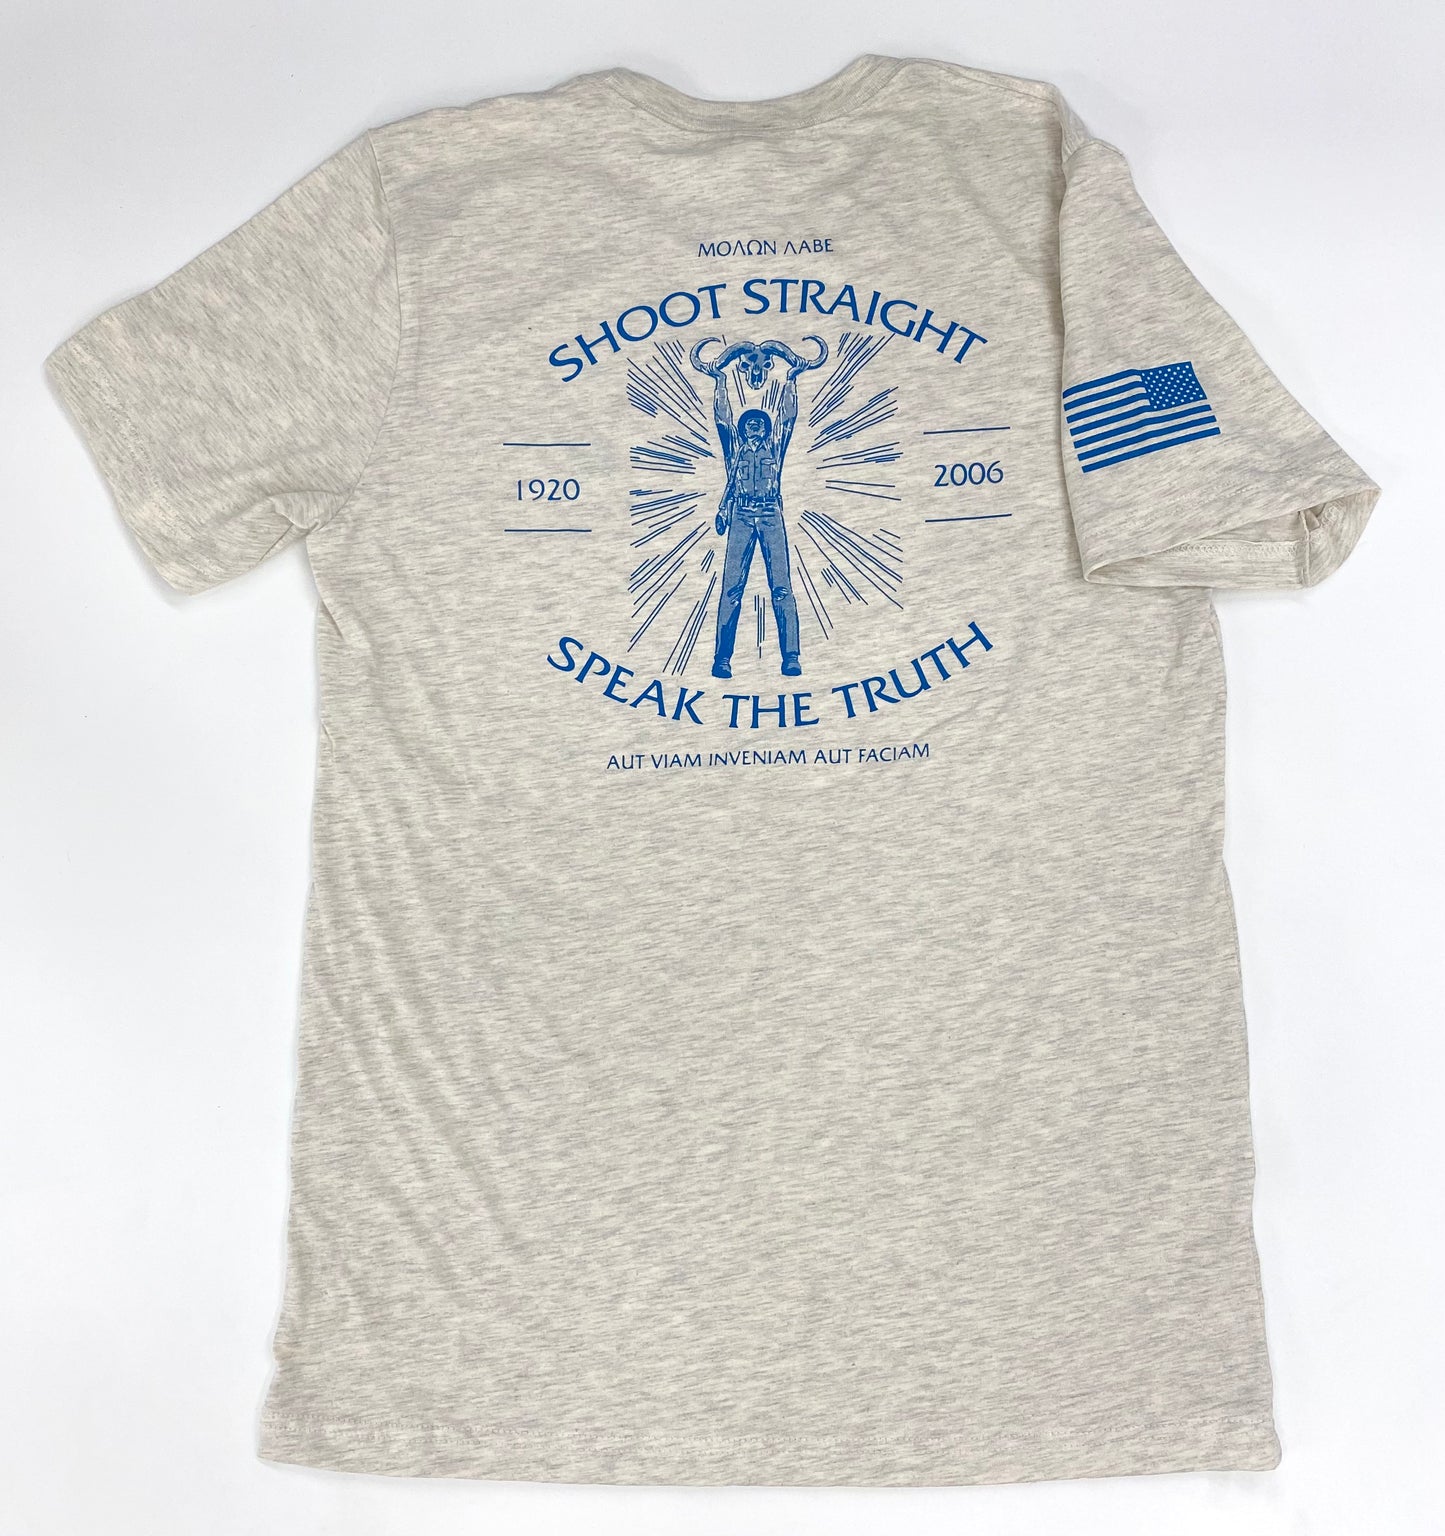 Shoot Straight/Speak the Truth T-Shirt Gray (Limited Edition)